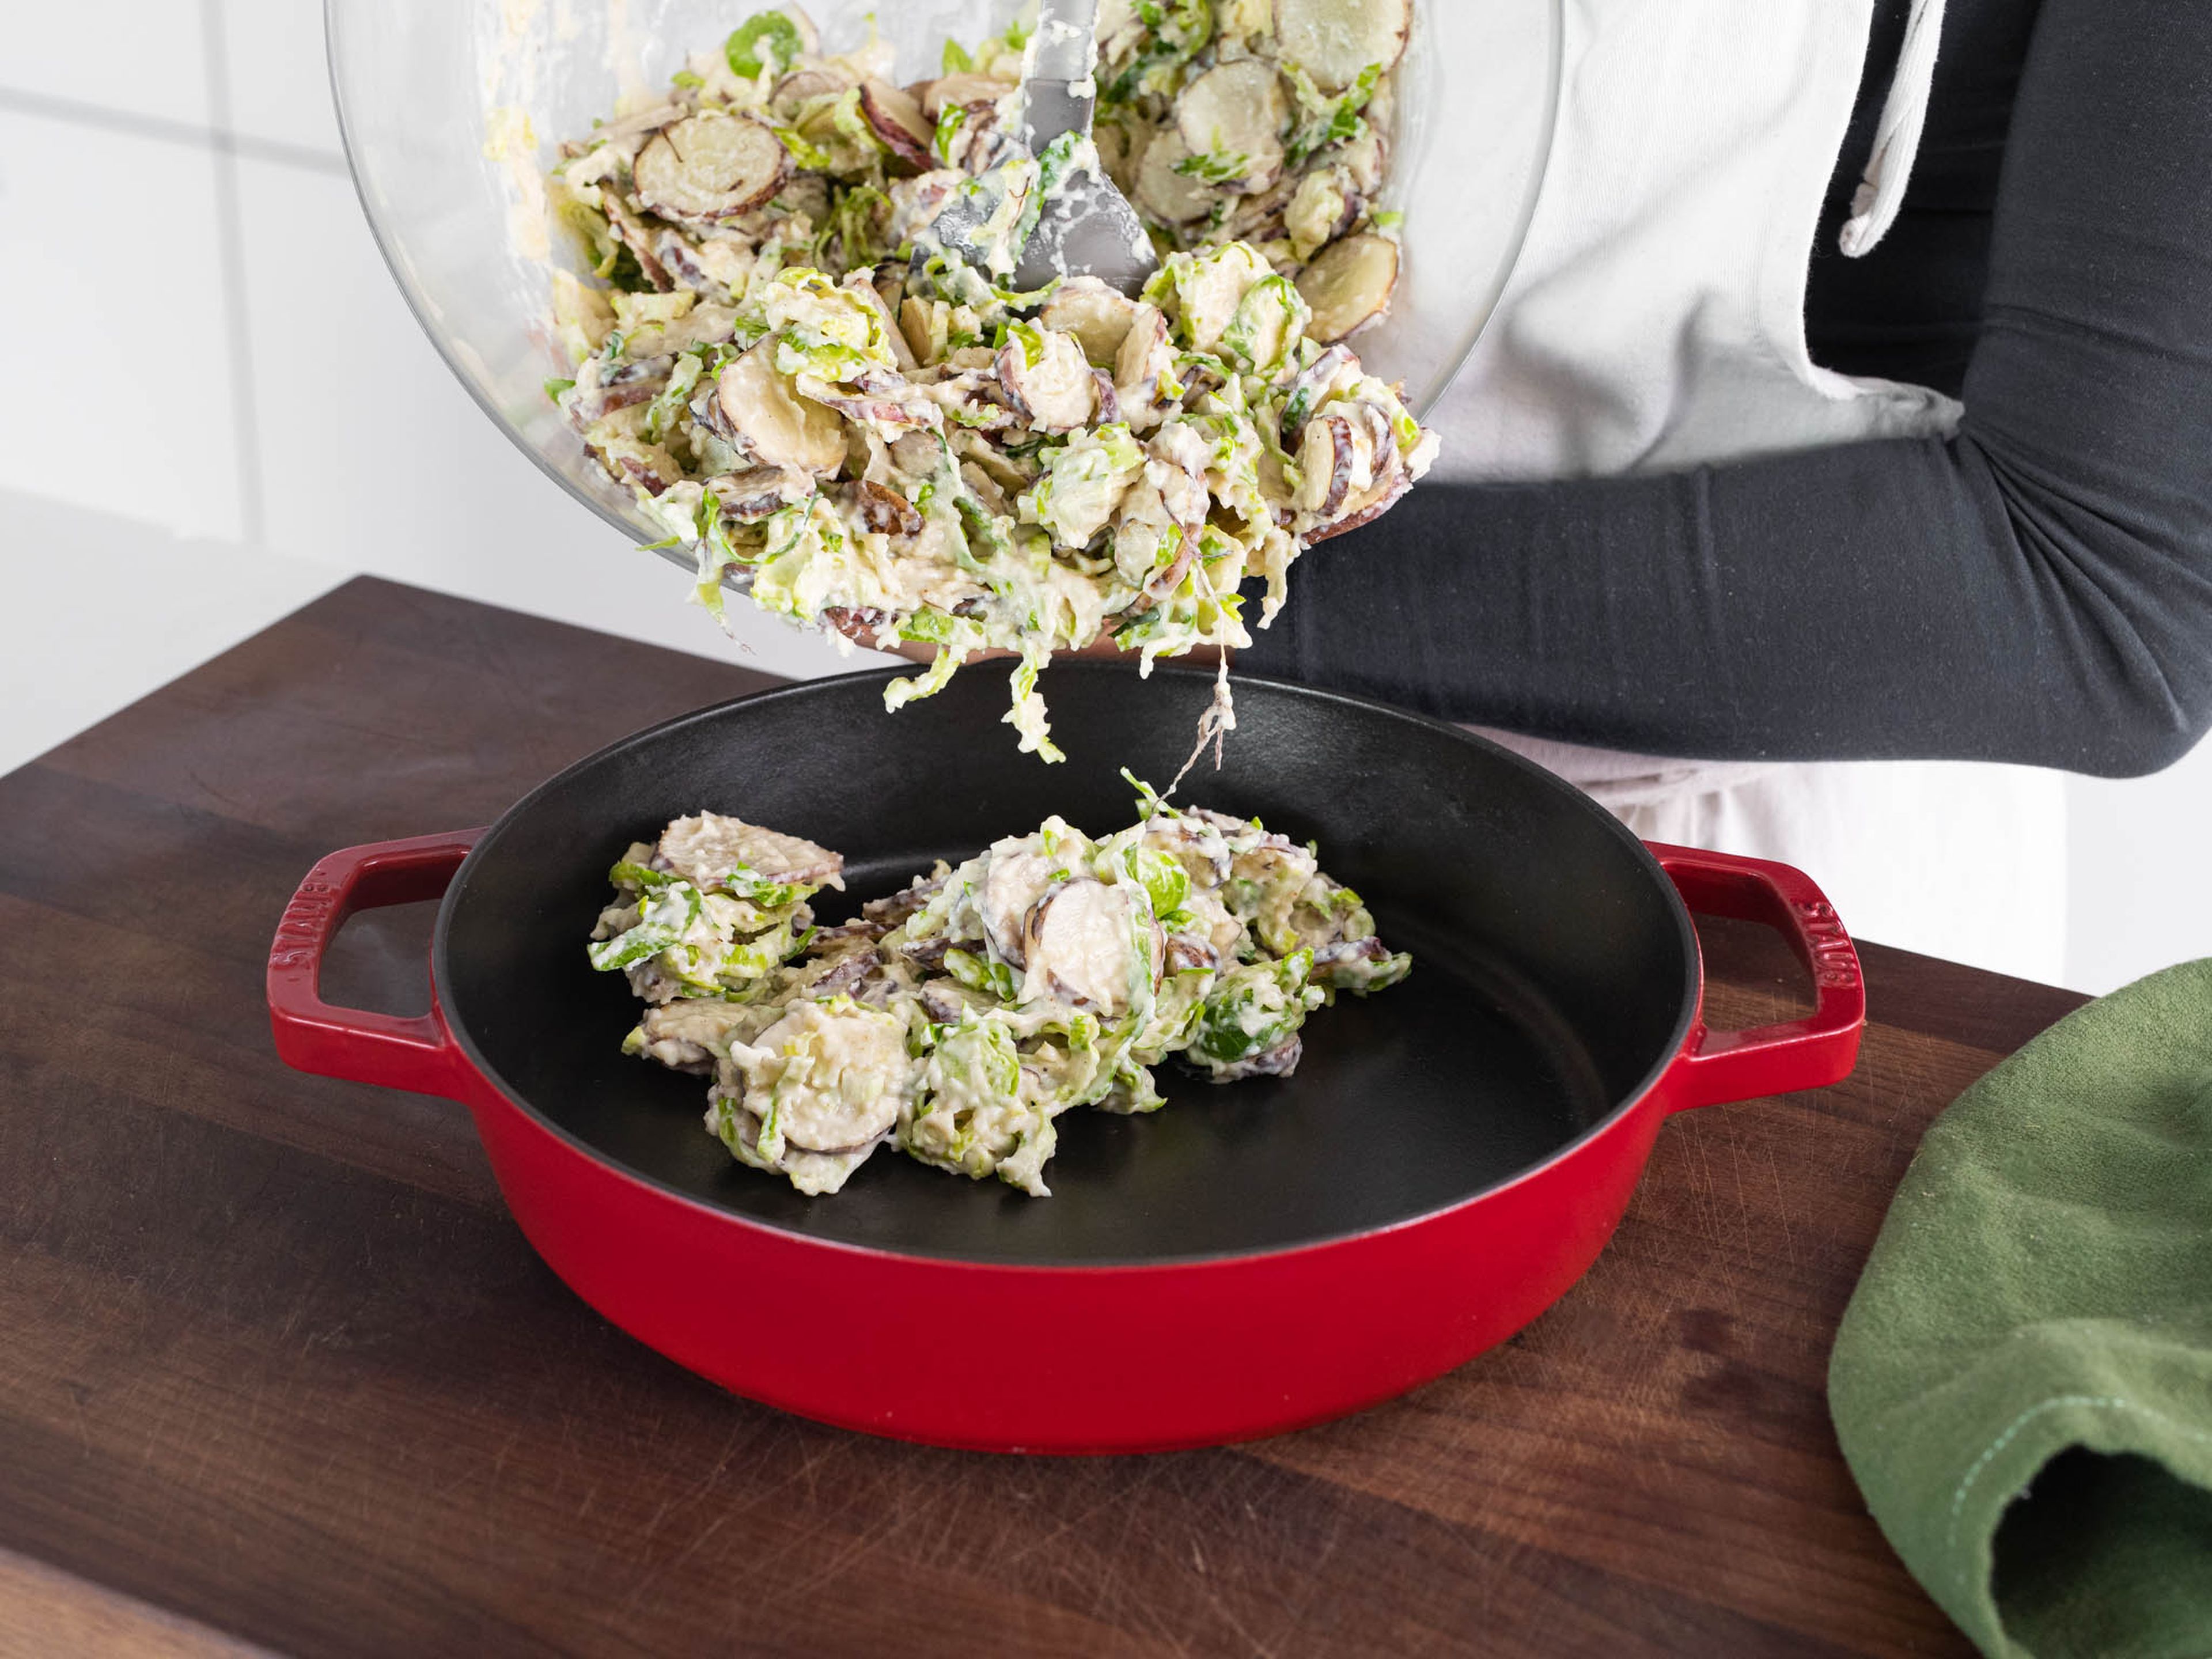 Mix sunchokes and brussel sprouts with Parmesan and thyme, pour over sauce. Transfer to a cast iron pan and bake at 180°C/350°F for approx. 40 - 50 min. Enjoy!